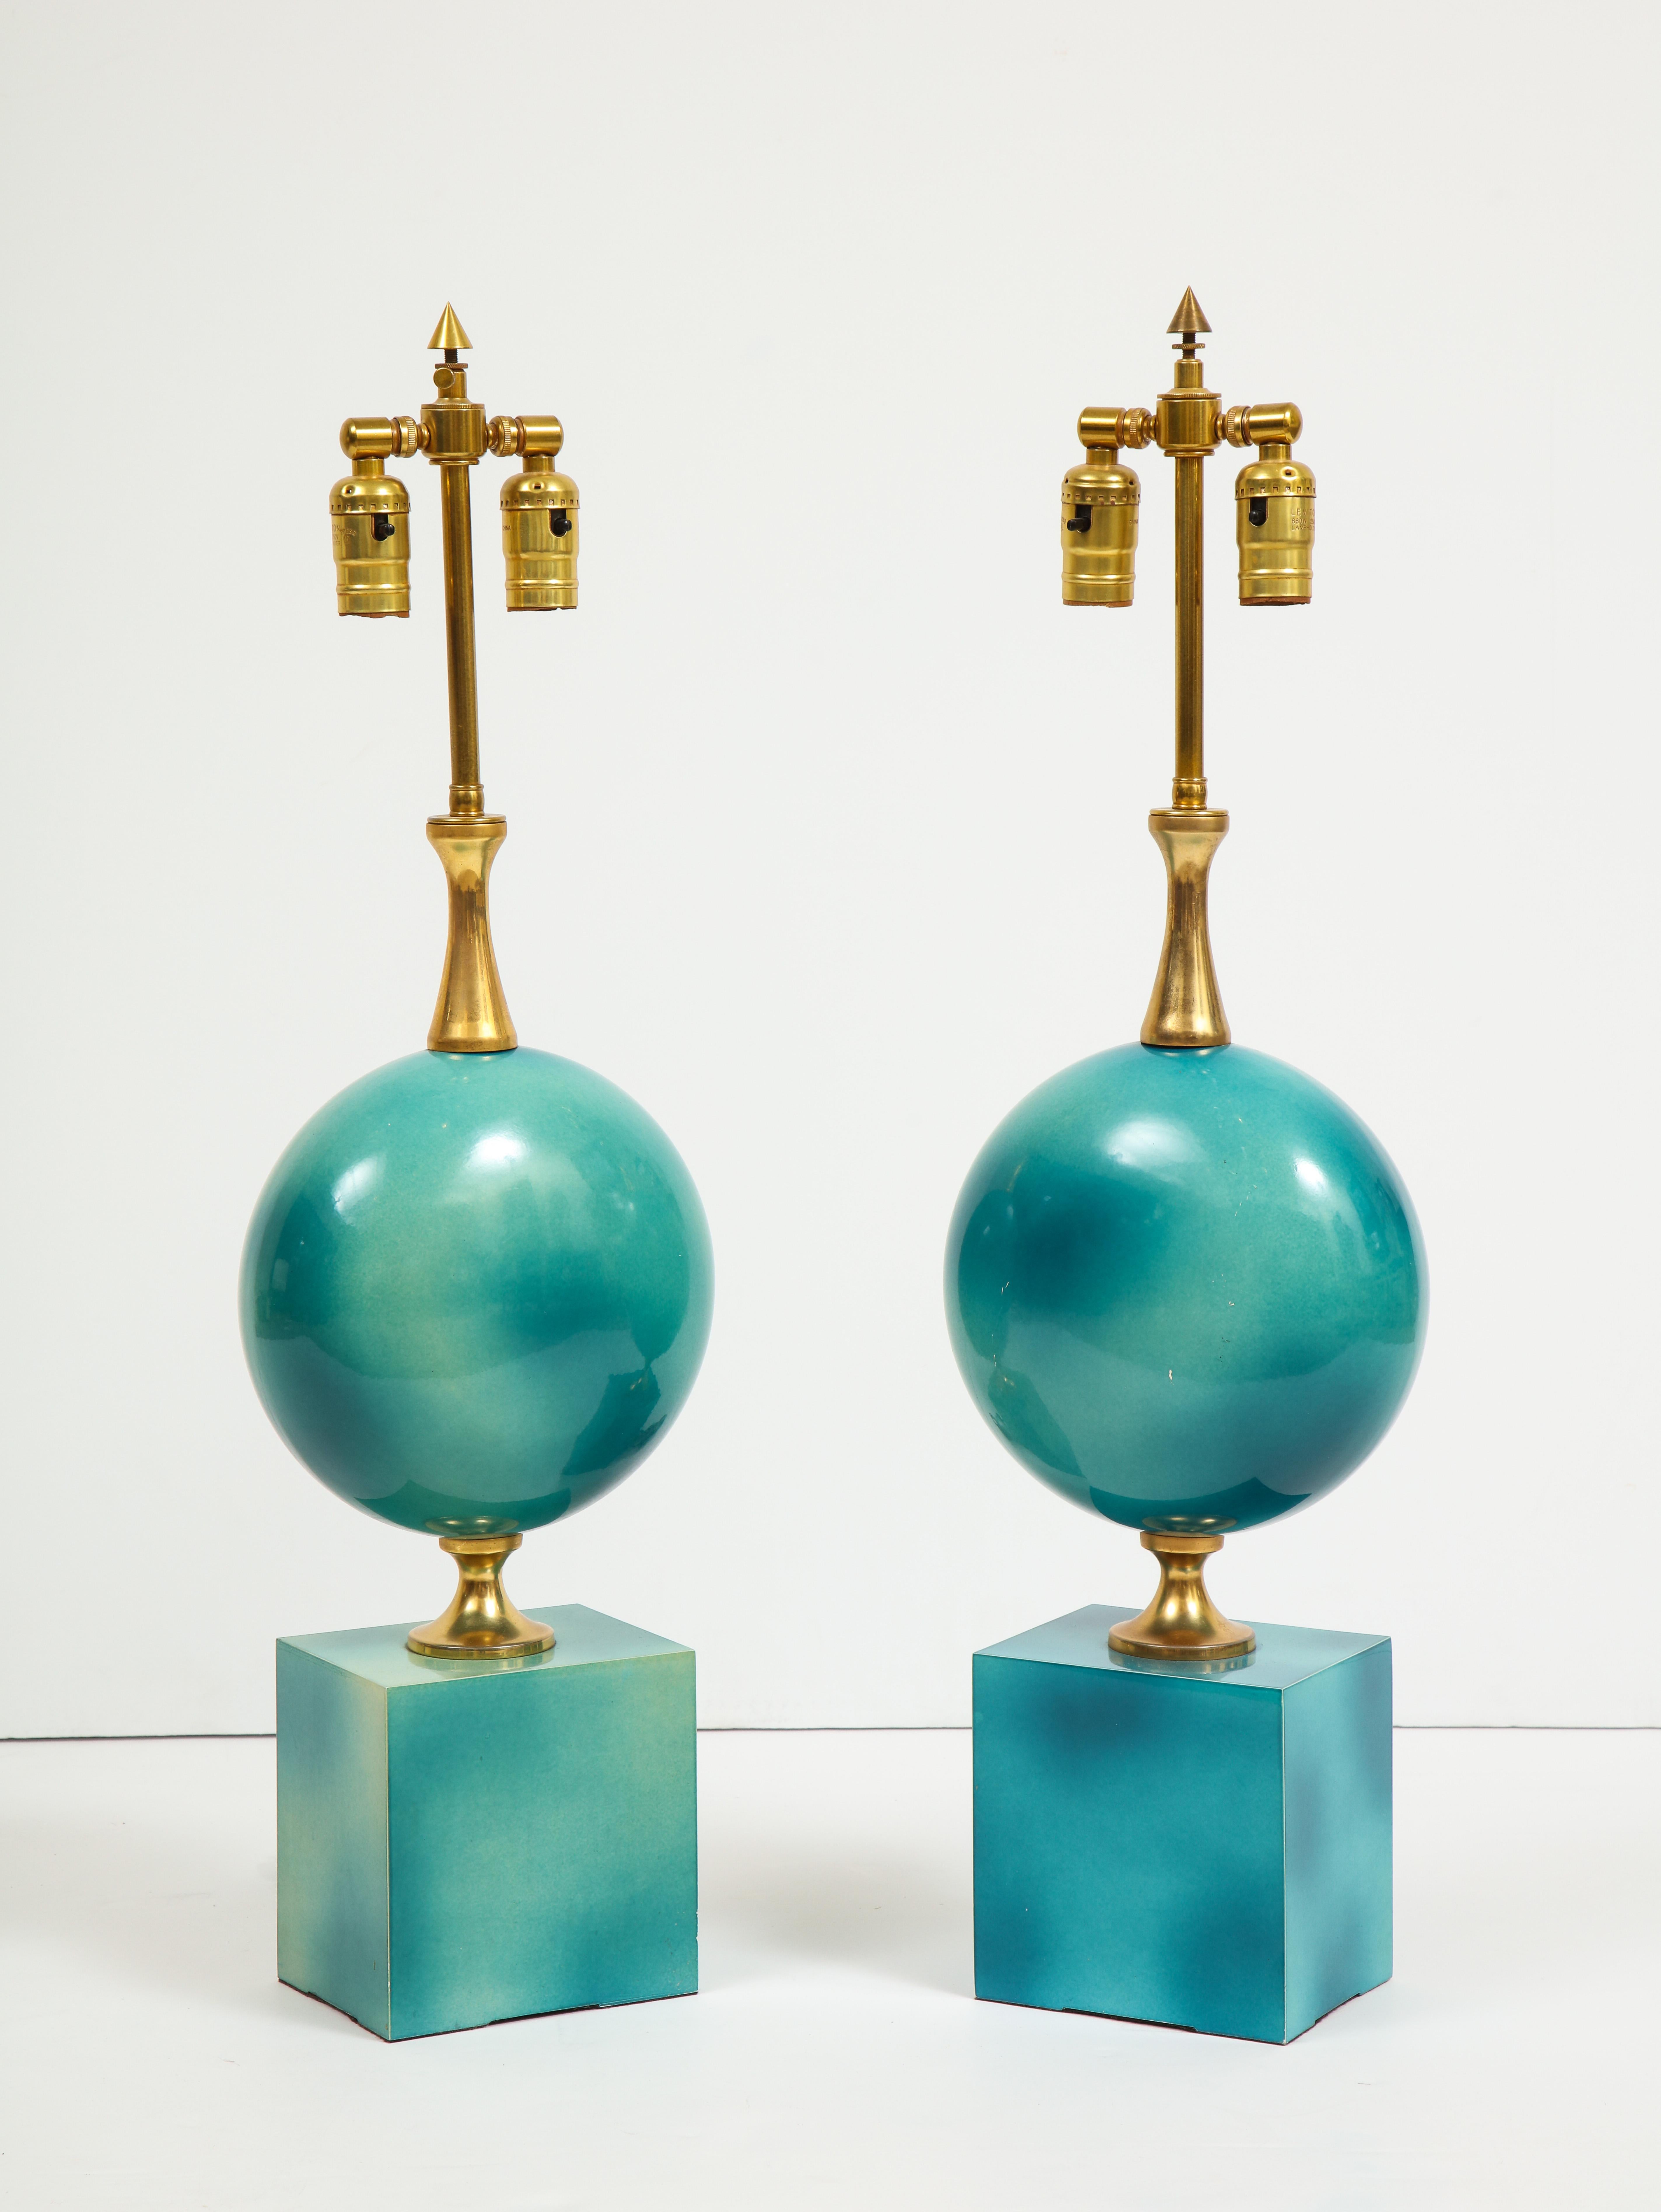 French Pair of Enameled Table Lamps by Maison Barbier